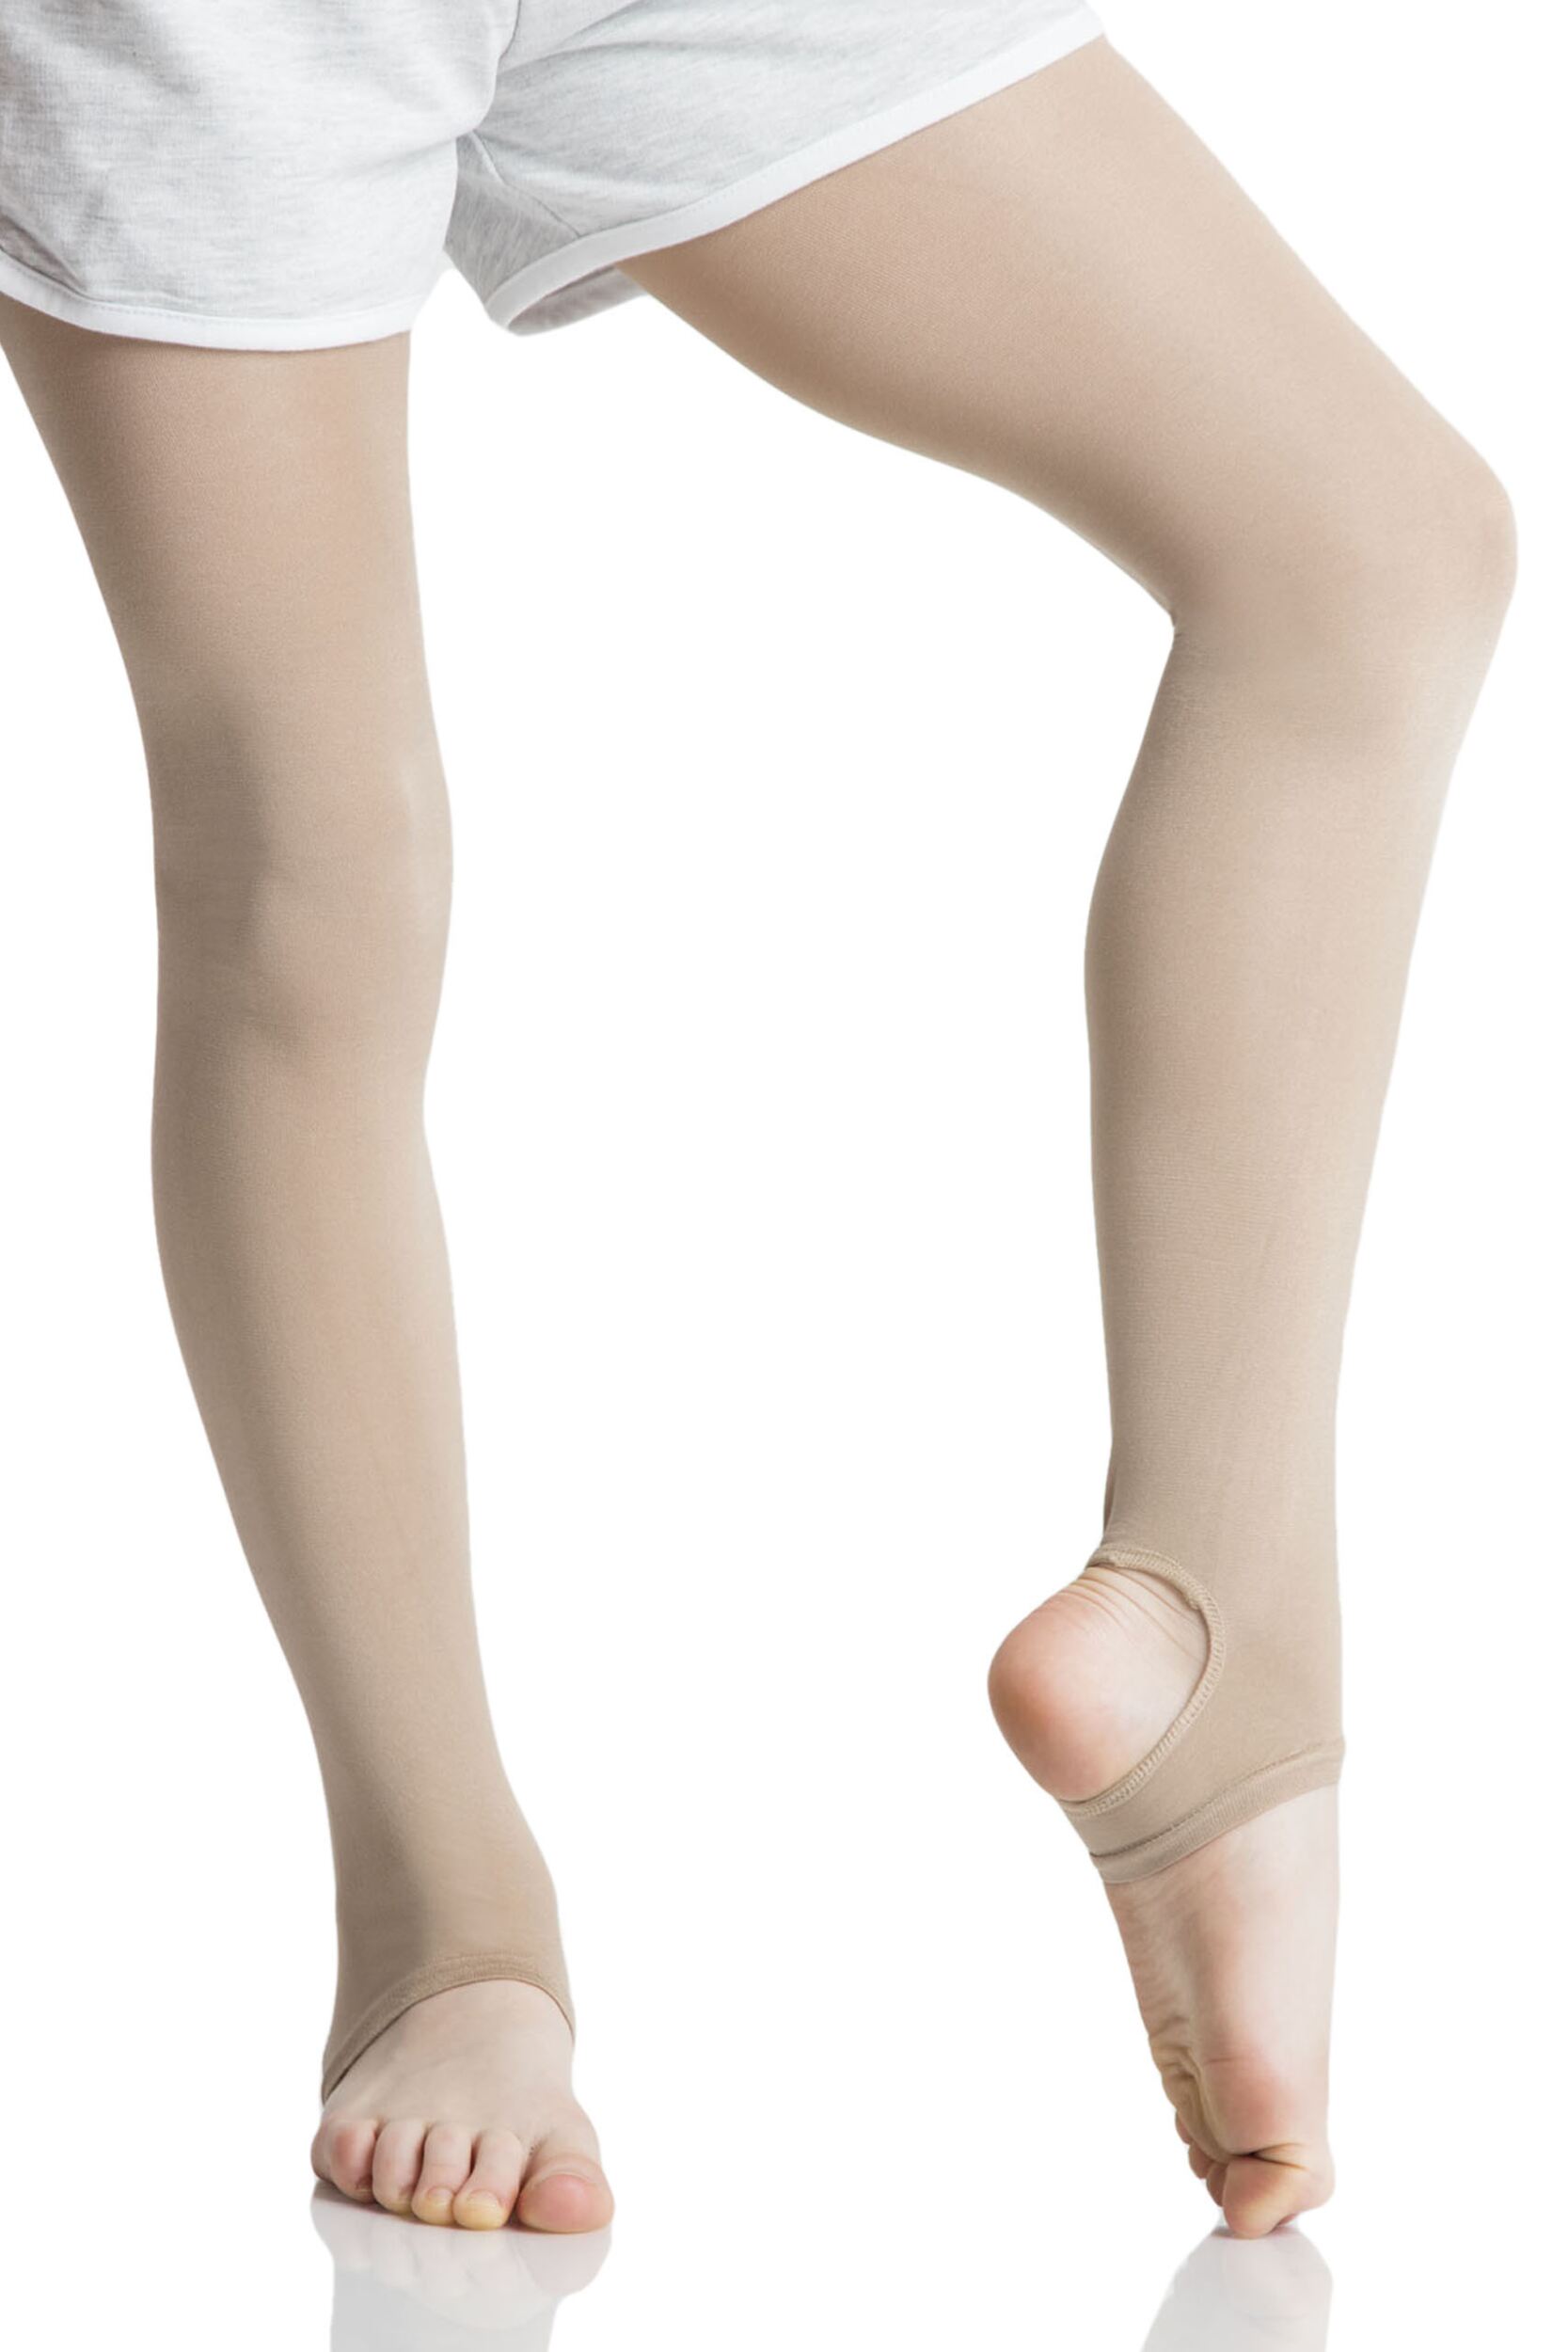 Image of Girls 1 Pair Silky Dance Shimmer Stirrup Tights